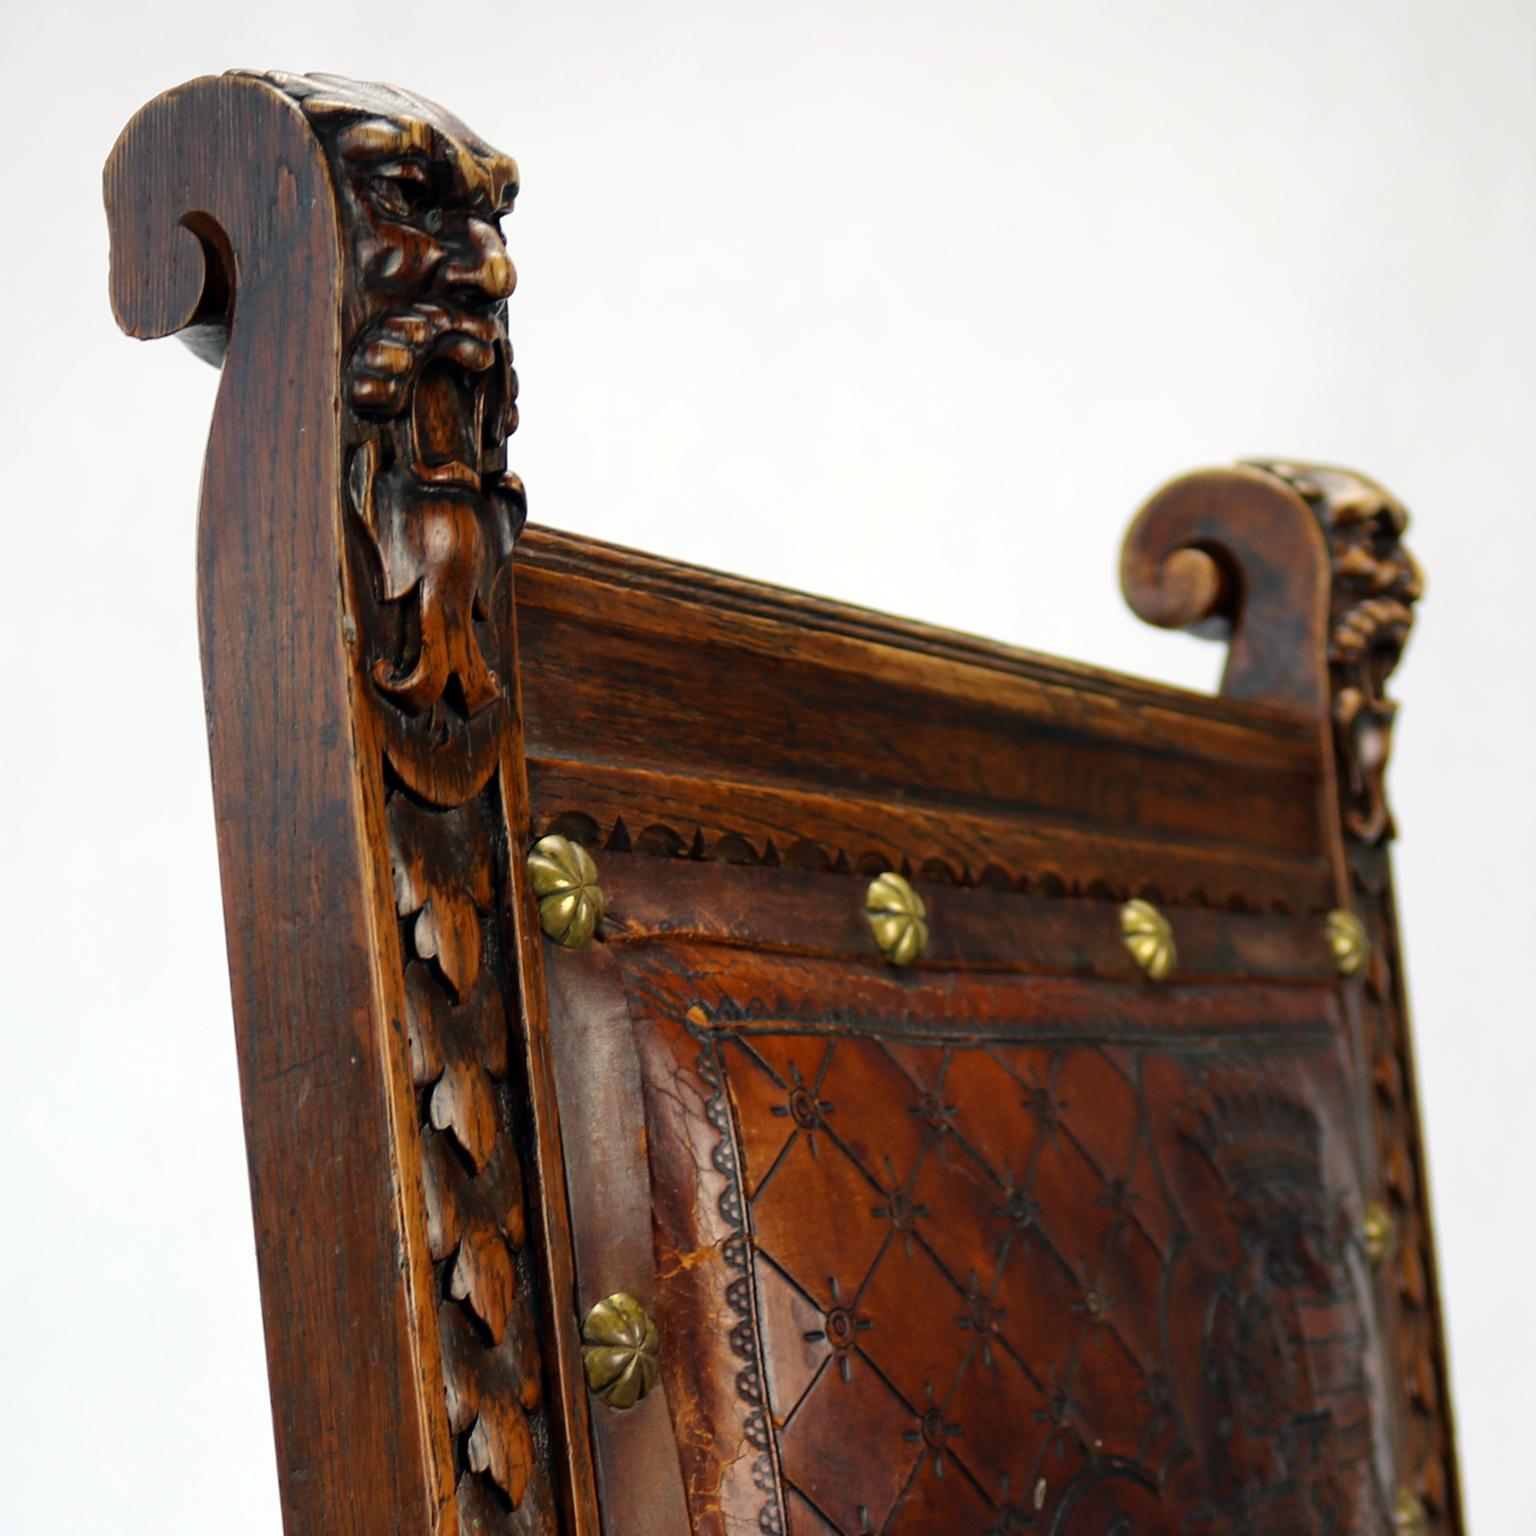 Reanaissance Revival Hand-Carved Chair with Embossed Leather 19th Century For Sale 2